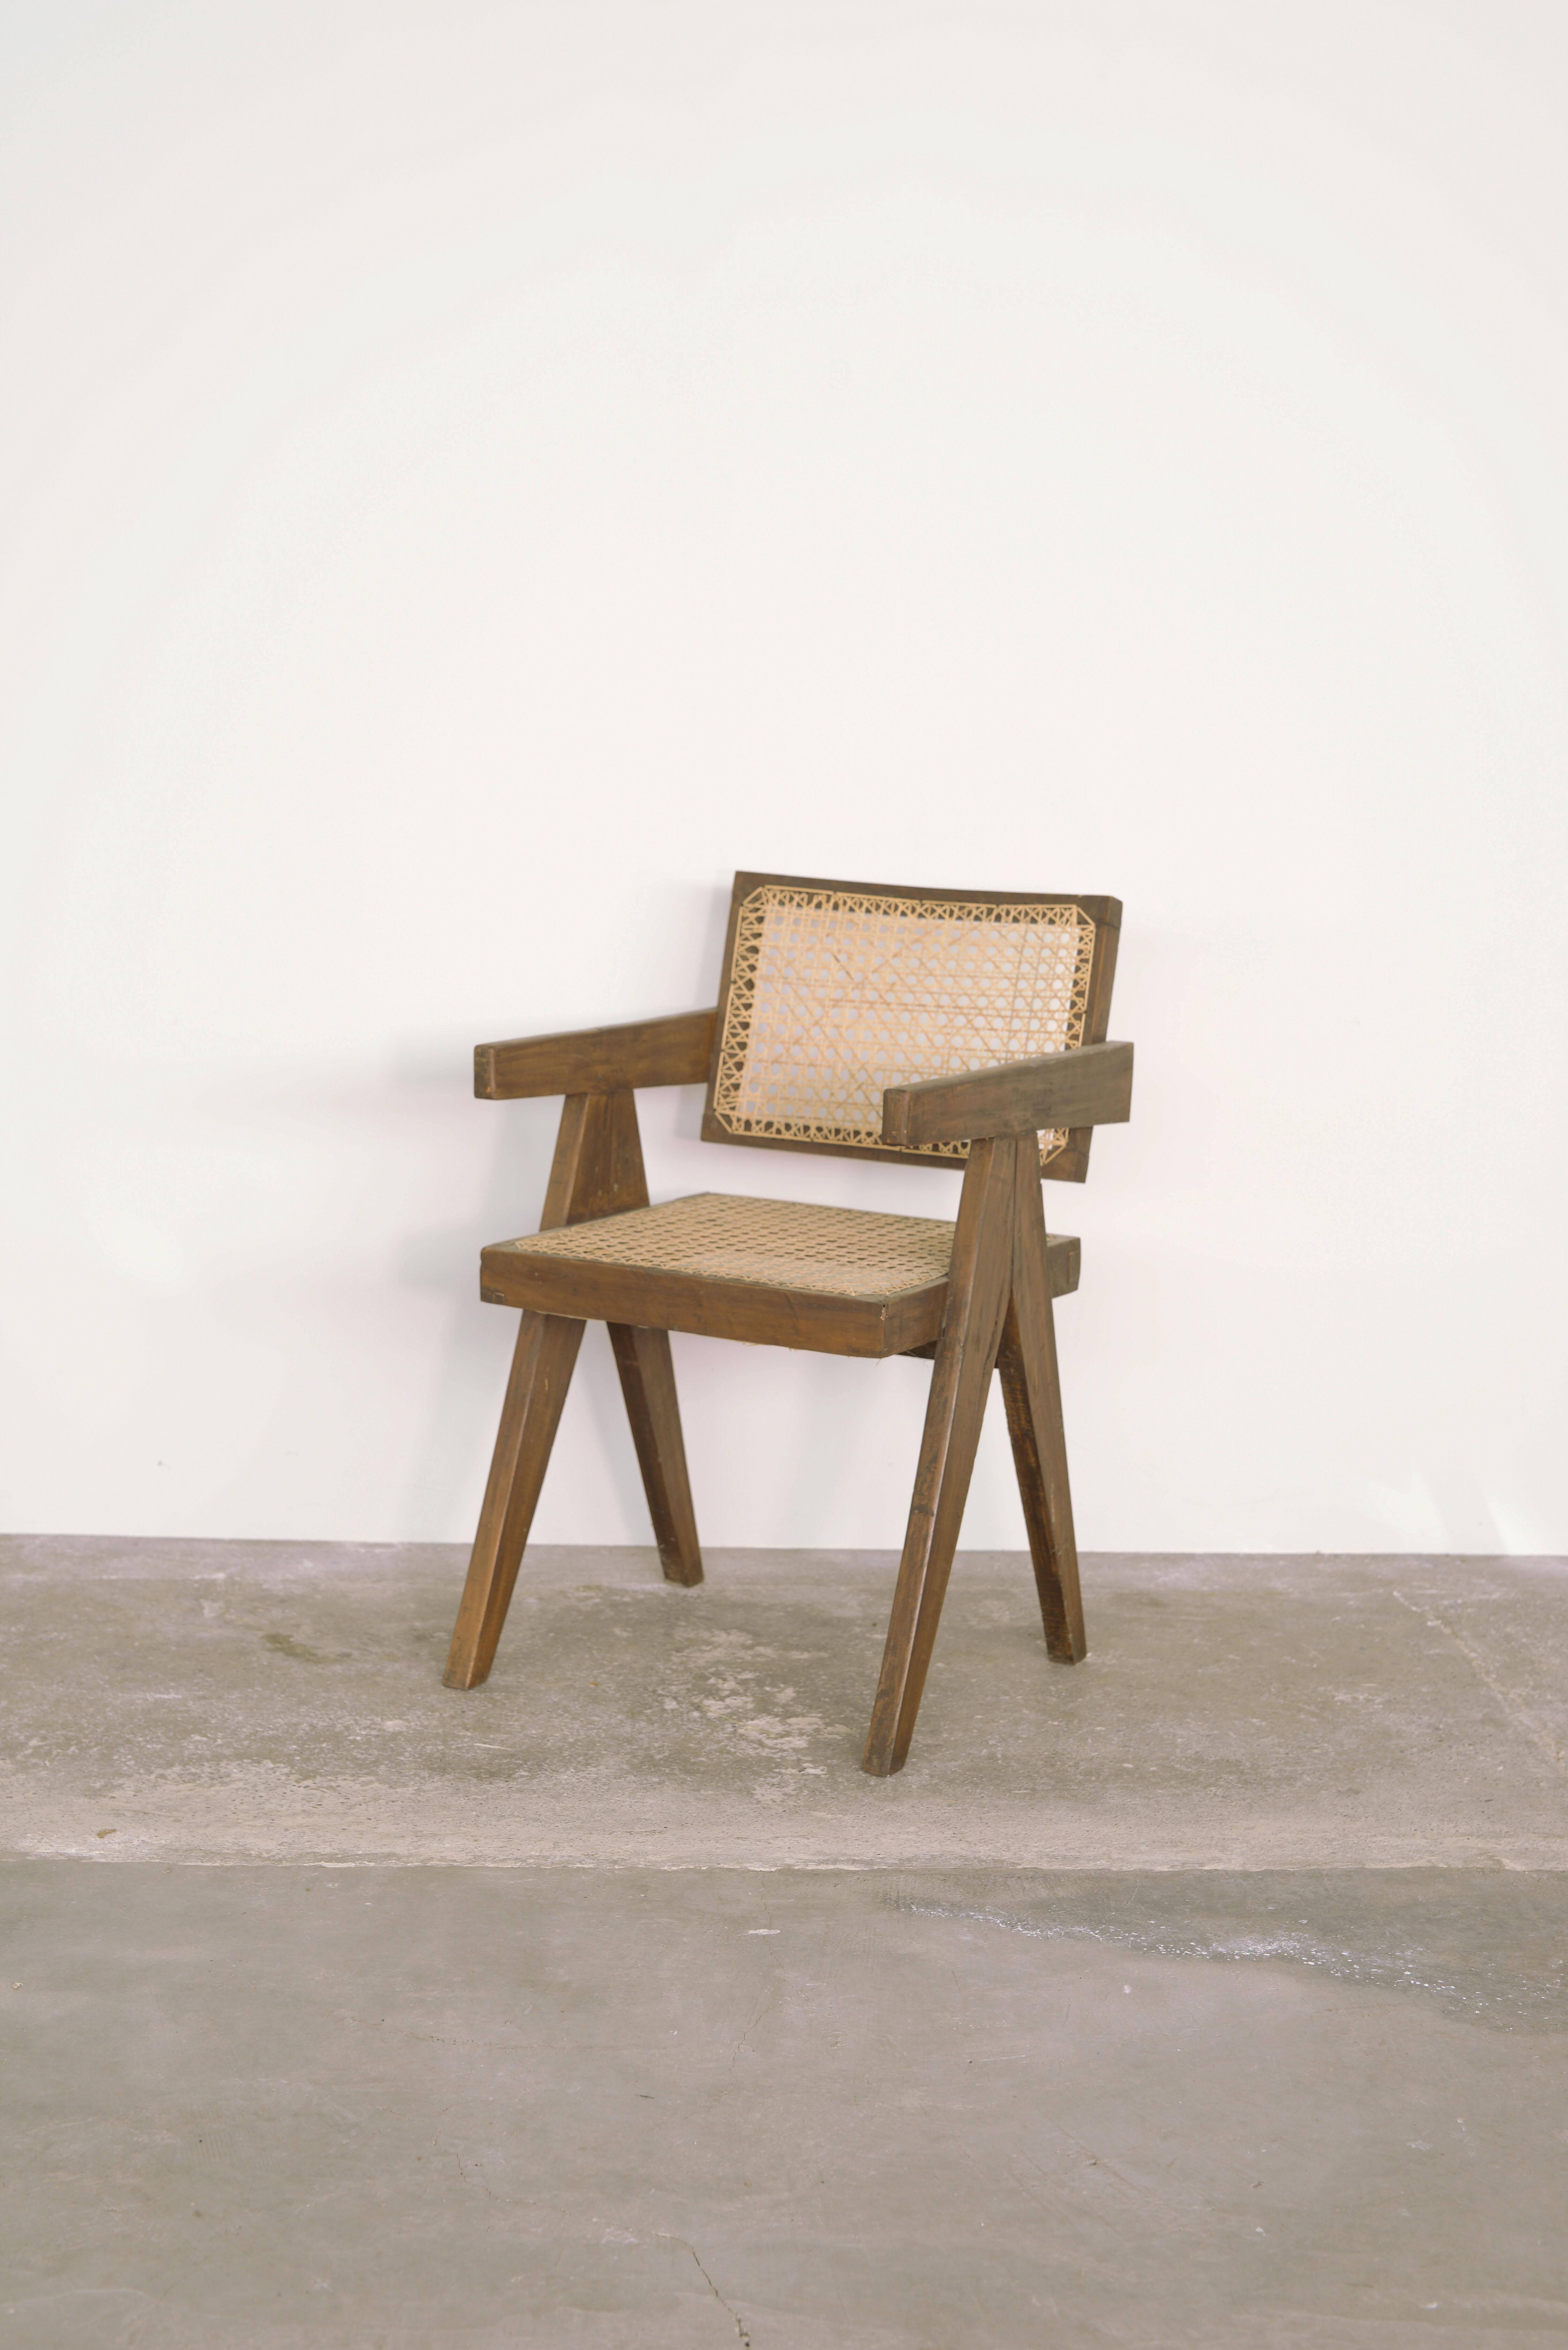 This chair is a fantastic piece, almost iconic. It is raw in its simplicity and 